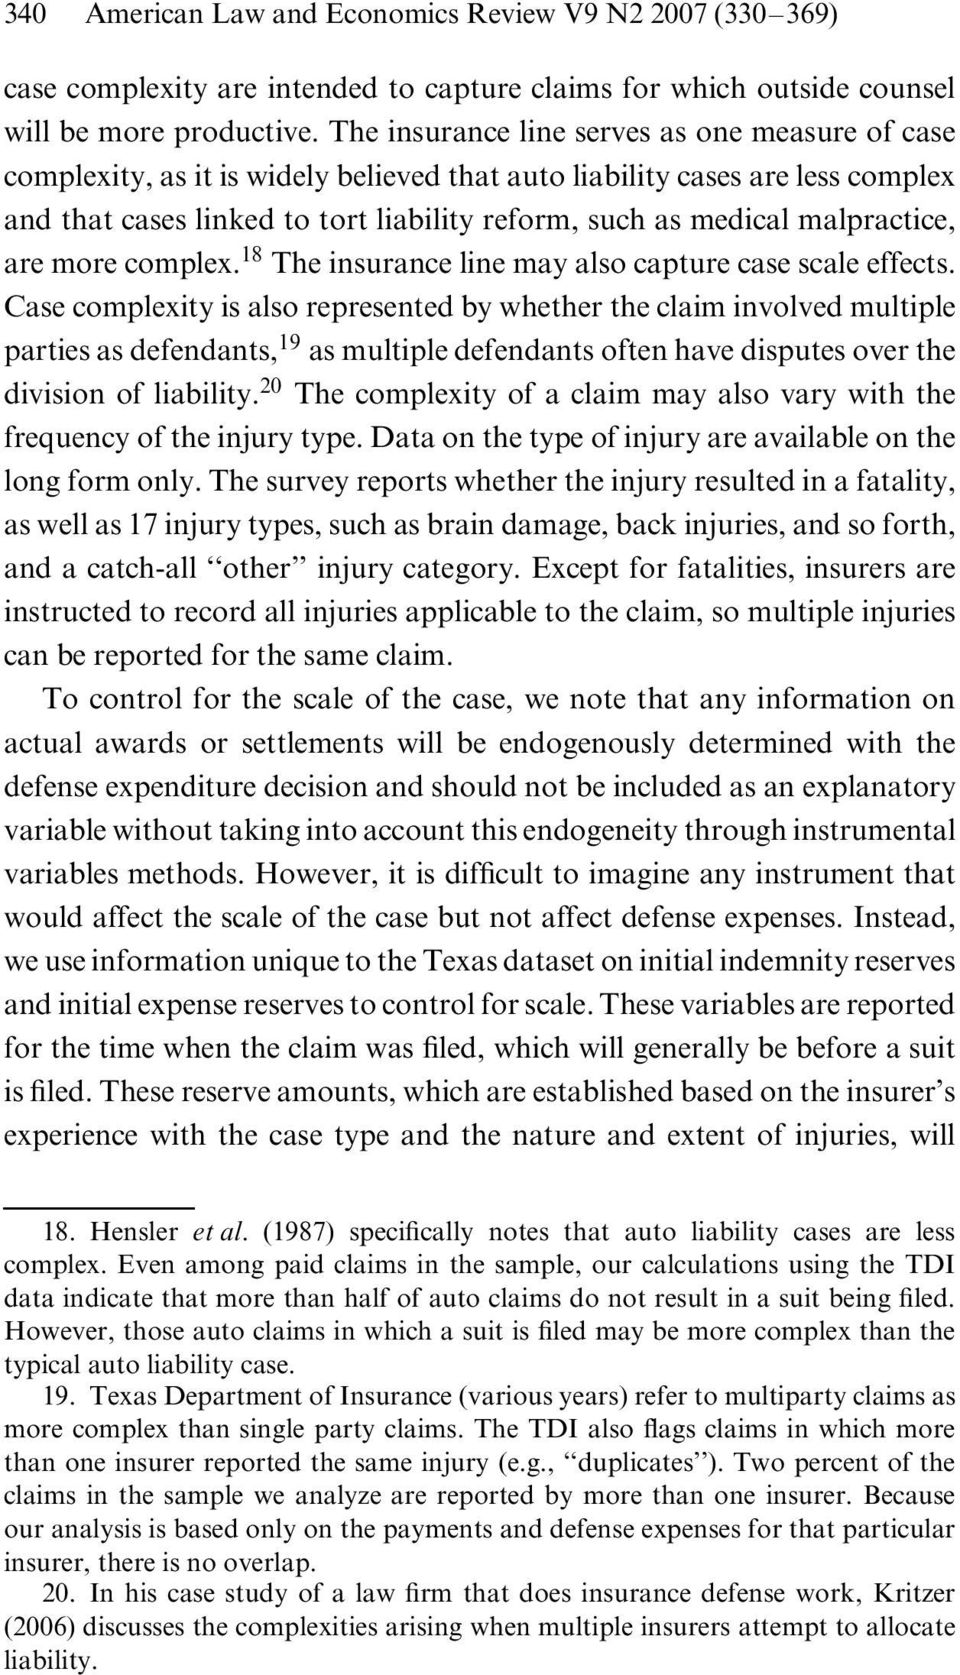 malpractice, are more complex. 18 The insurance line may also capture case scale effects.